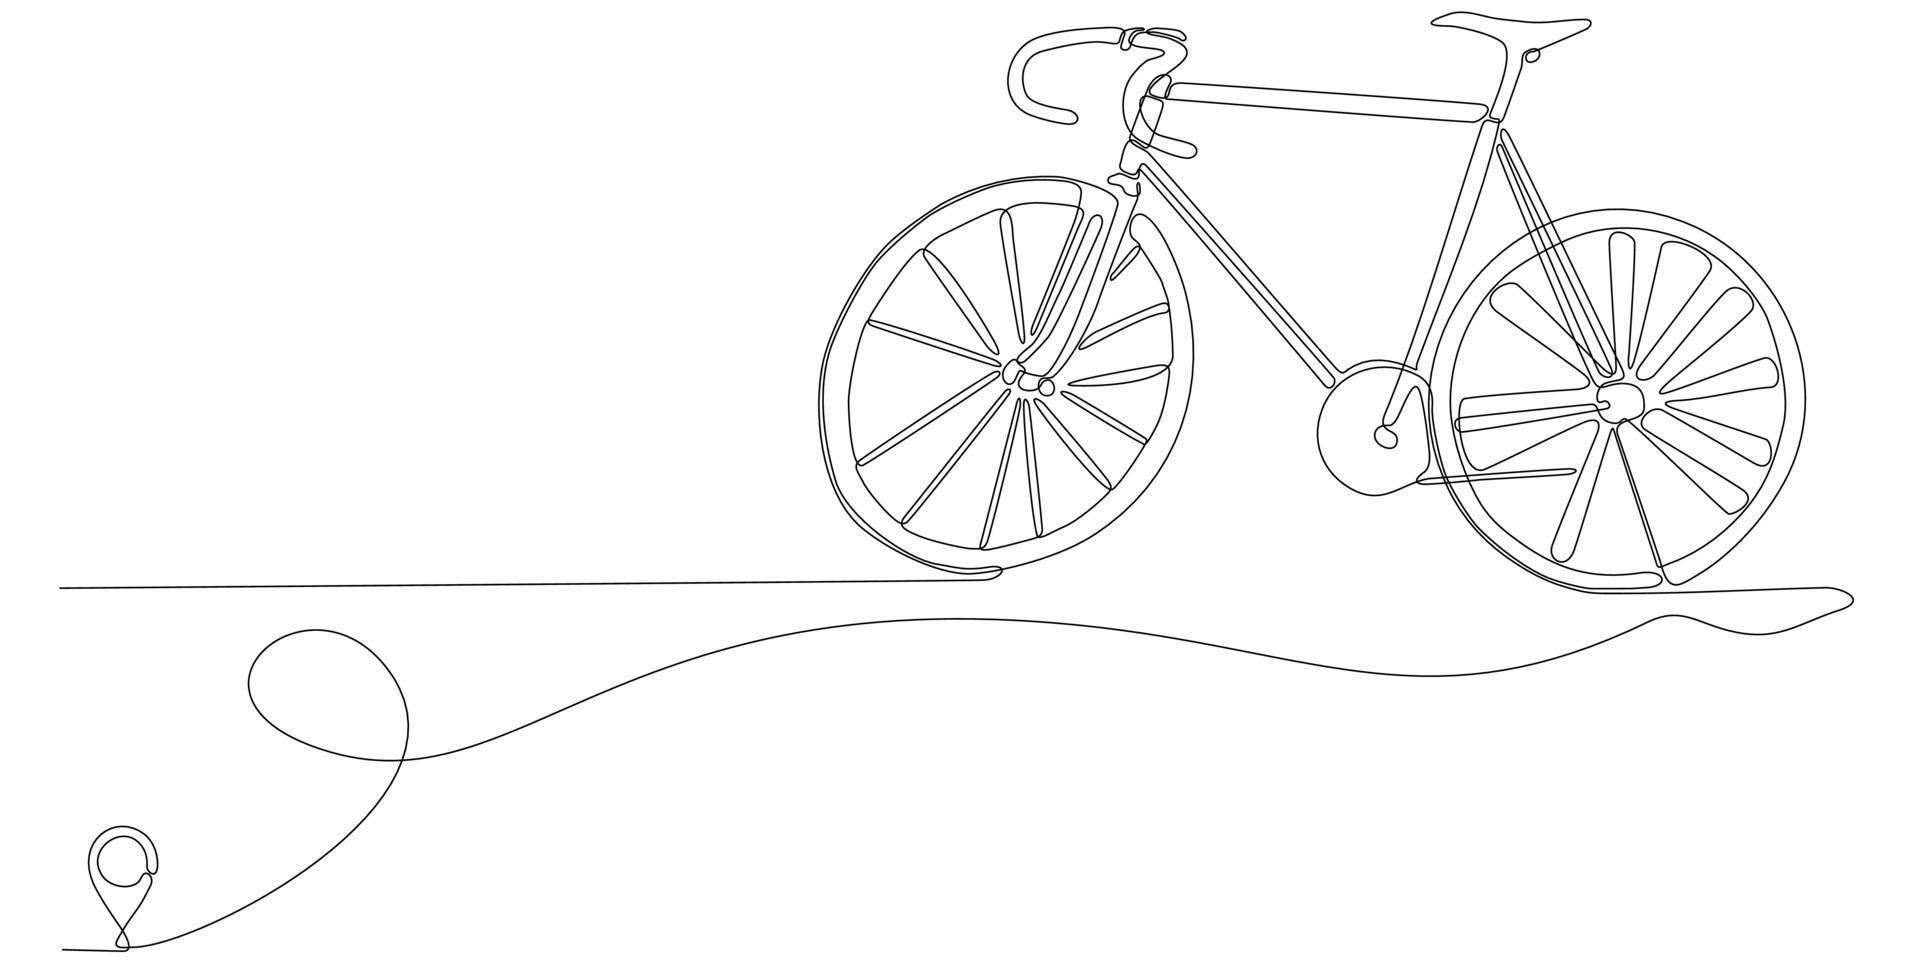 Line icon vector continuous line drawing of bicycle line from oulis house route with starting point and single line trail - Vector illustration. - Vector